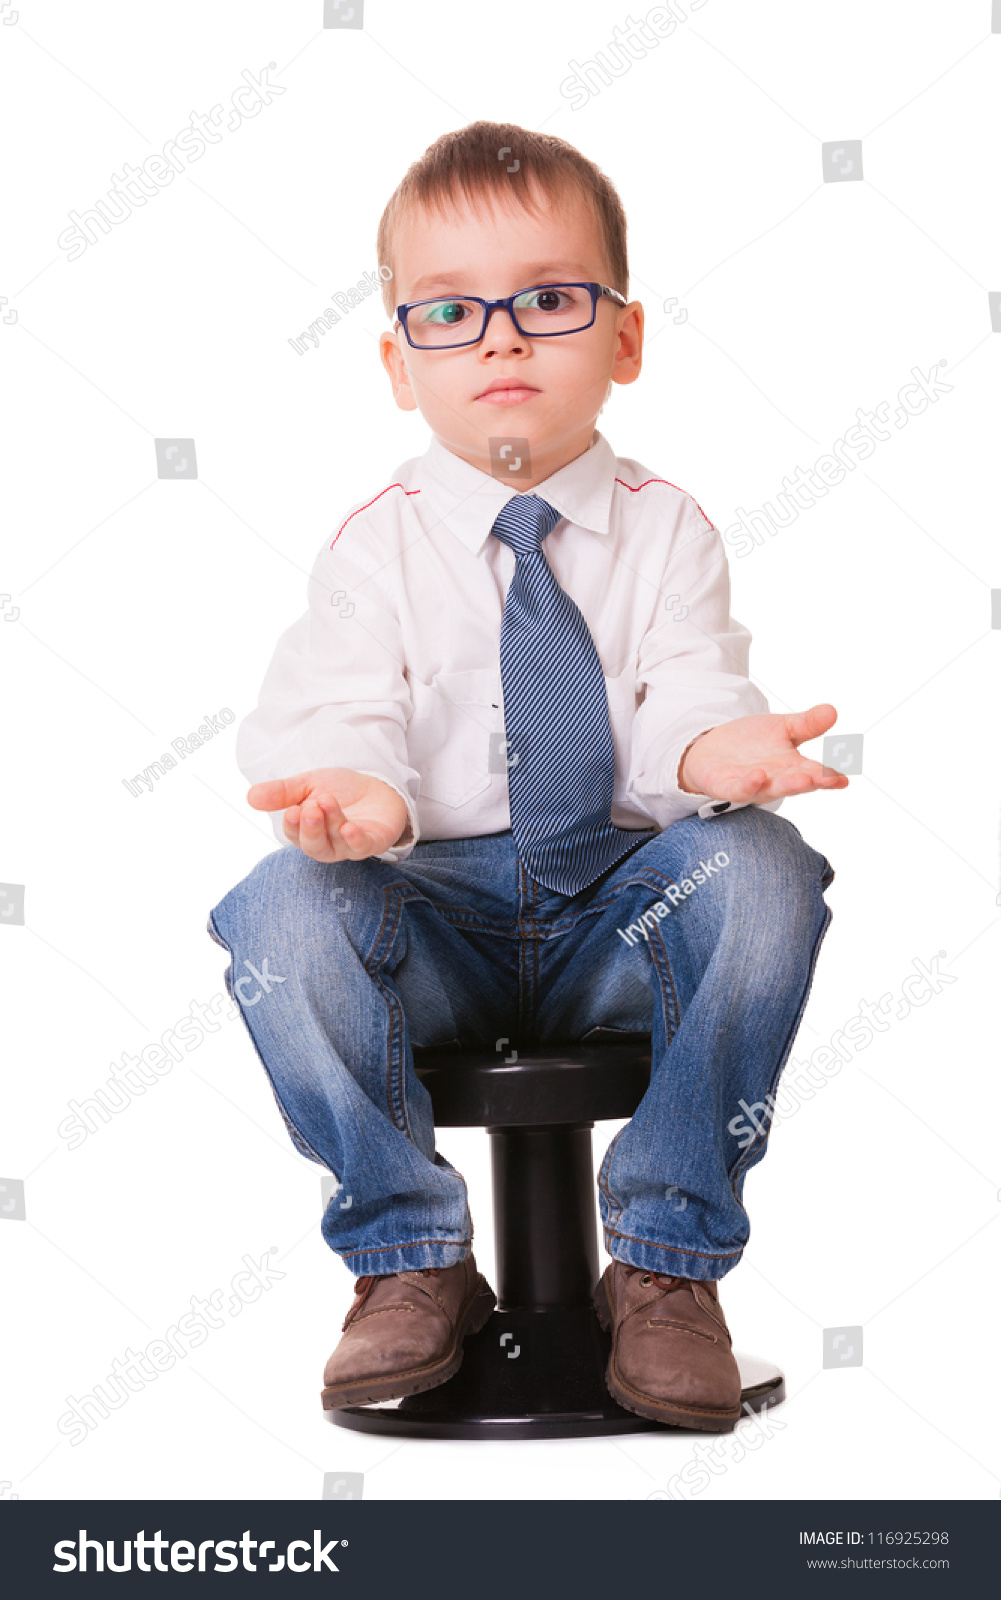 Confused Clever Kid Jeans Shirt Sitting Stock Photo 116925298 ...